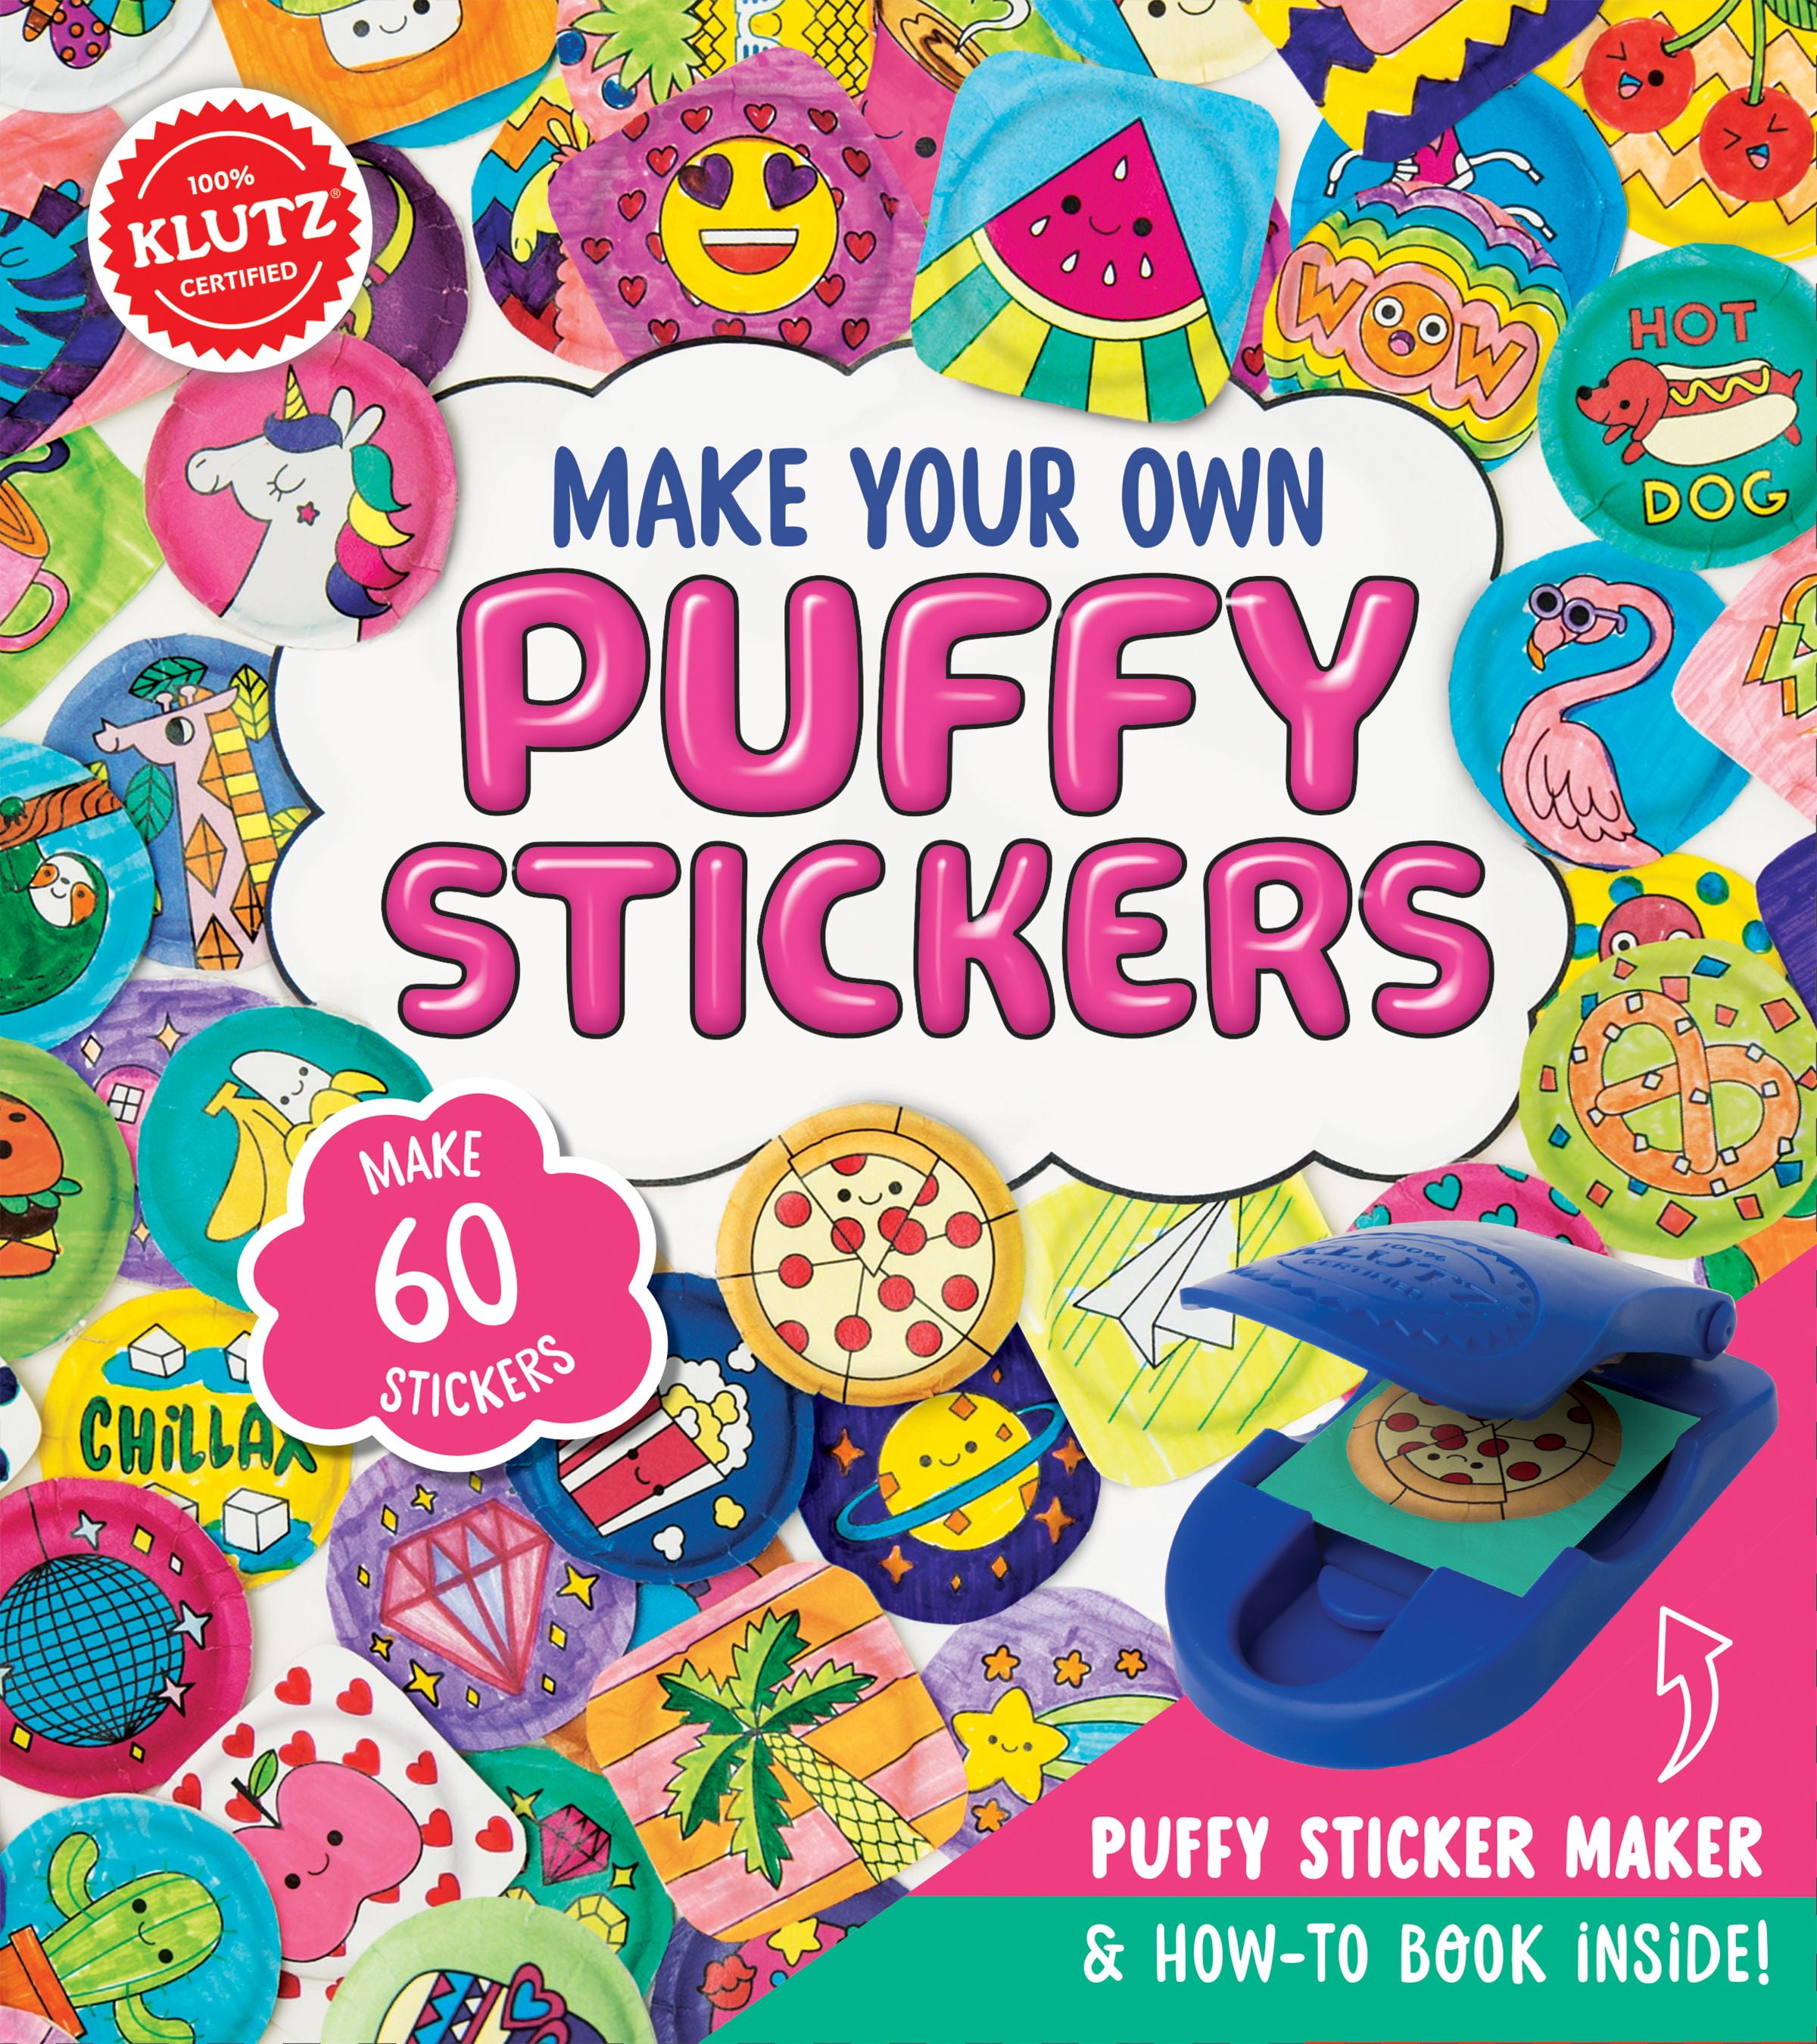 Make Your Own Puffy Stickers- 